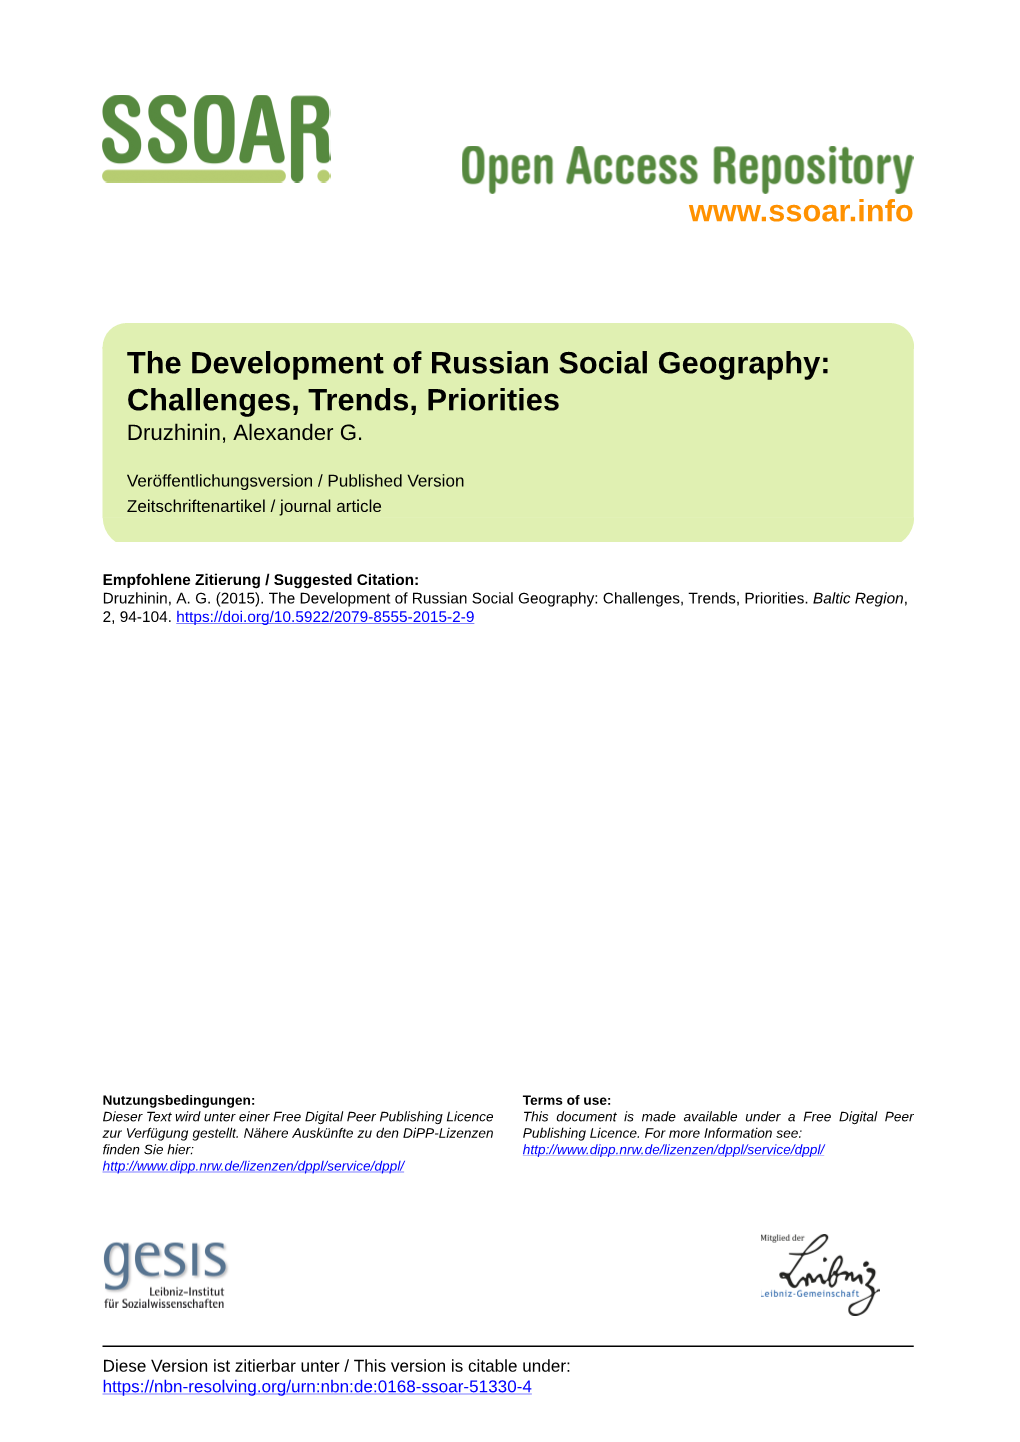 The Development of Russian Social Geography: Challenges, Trends, Priorities